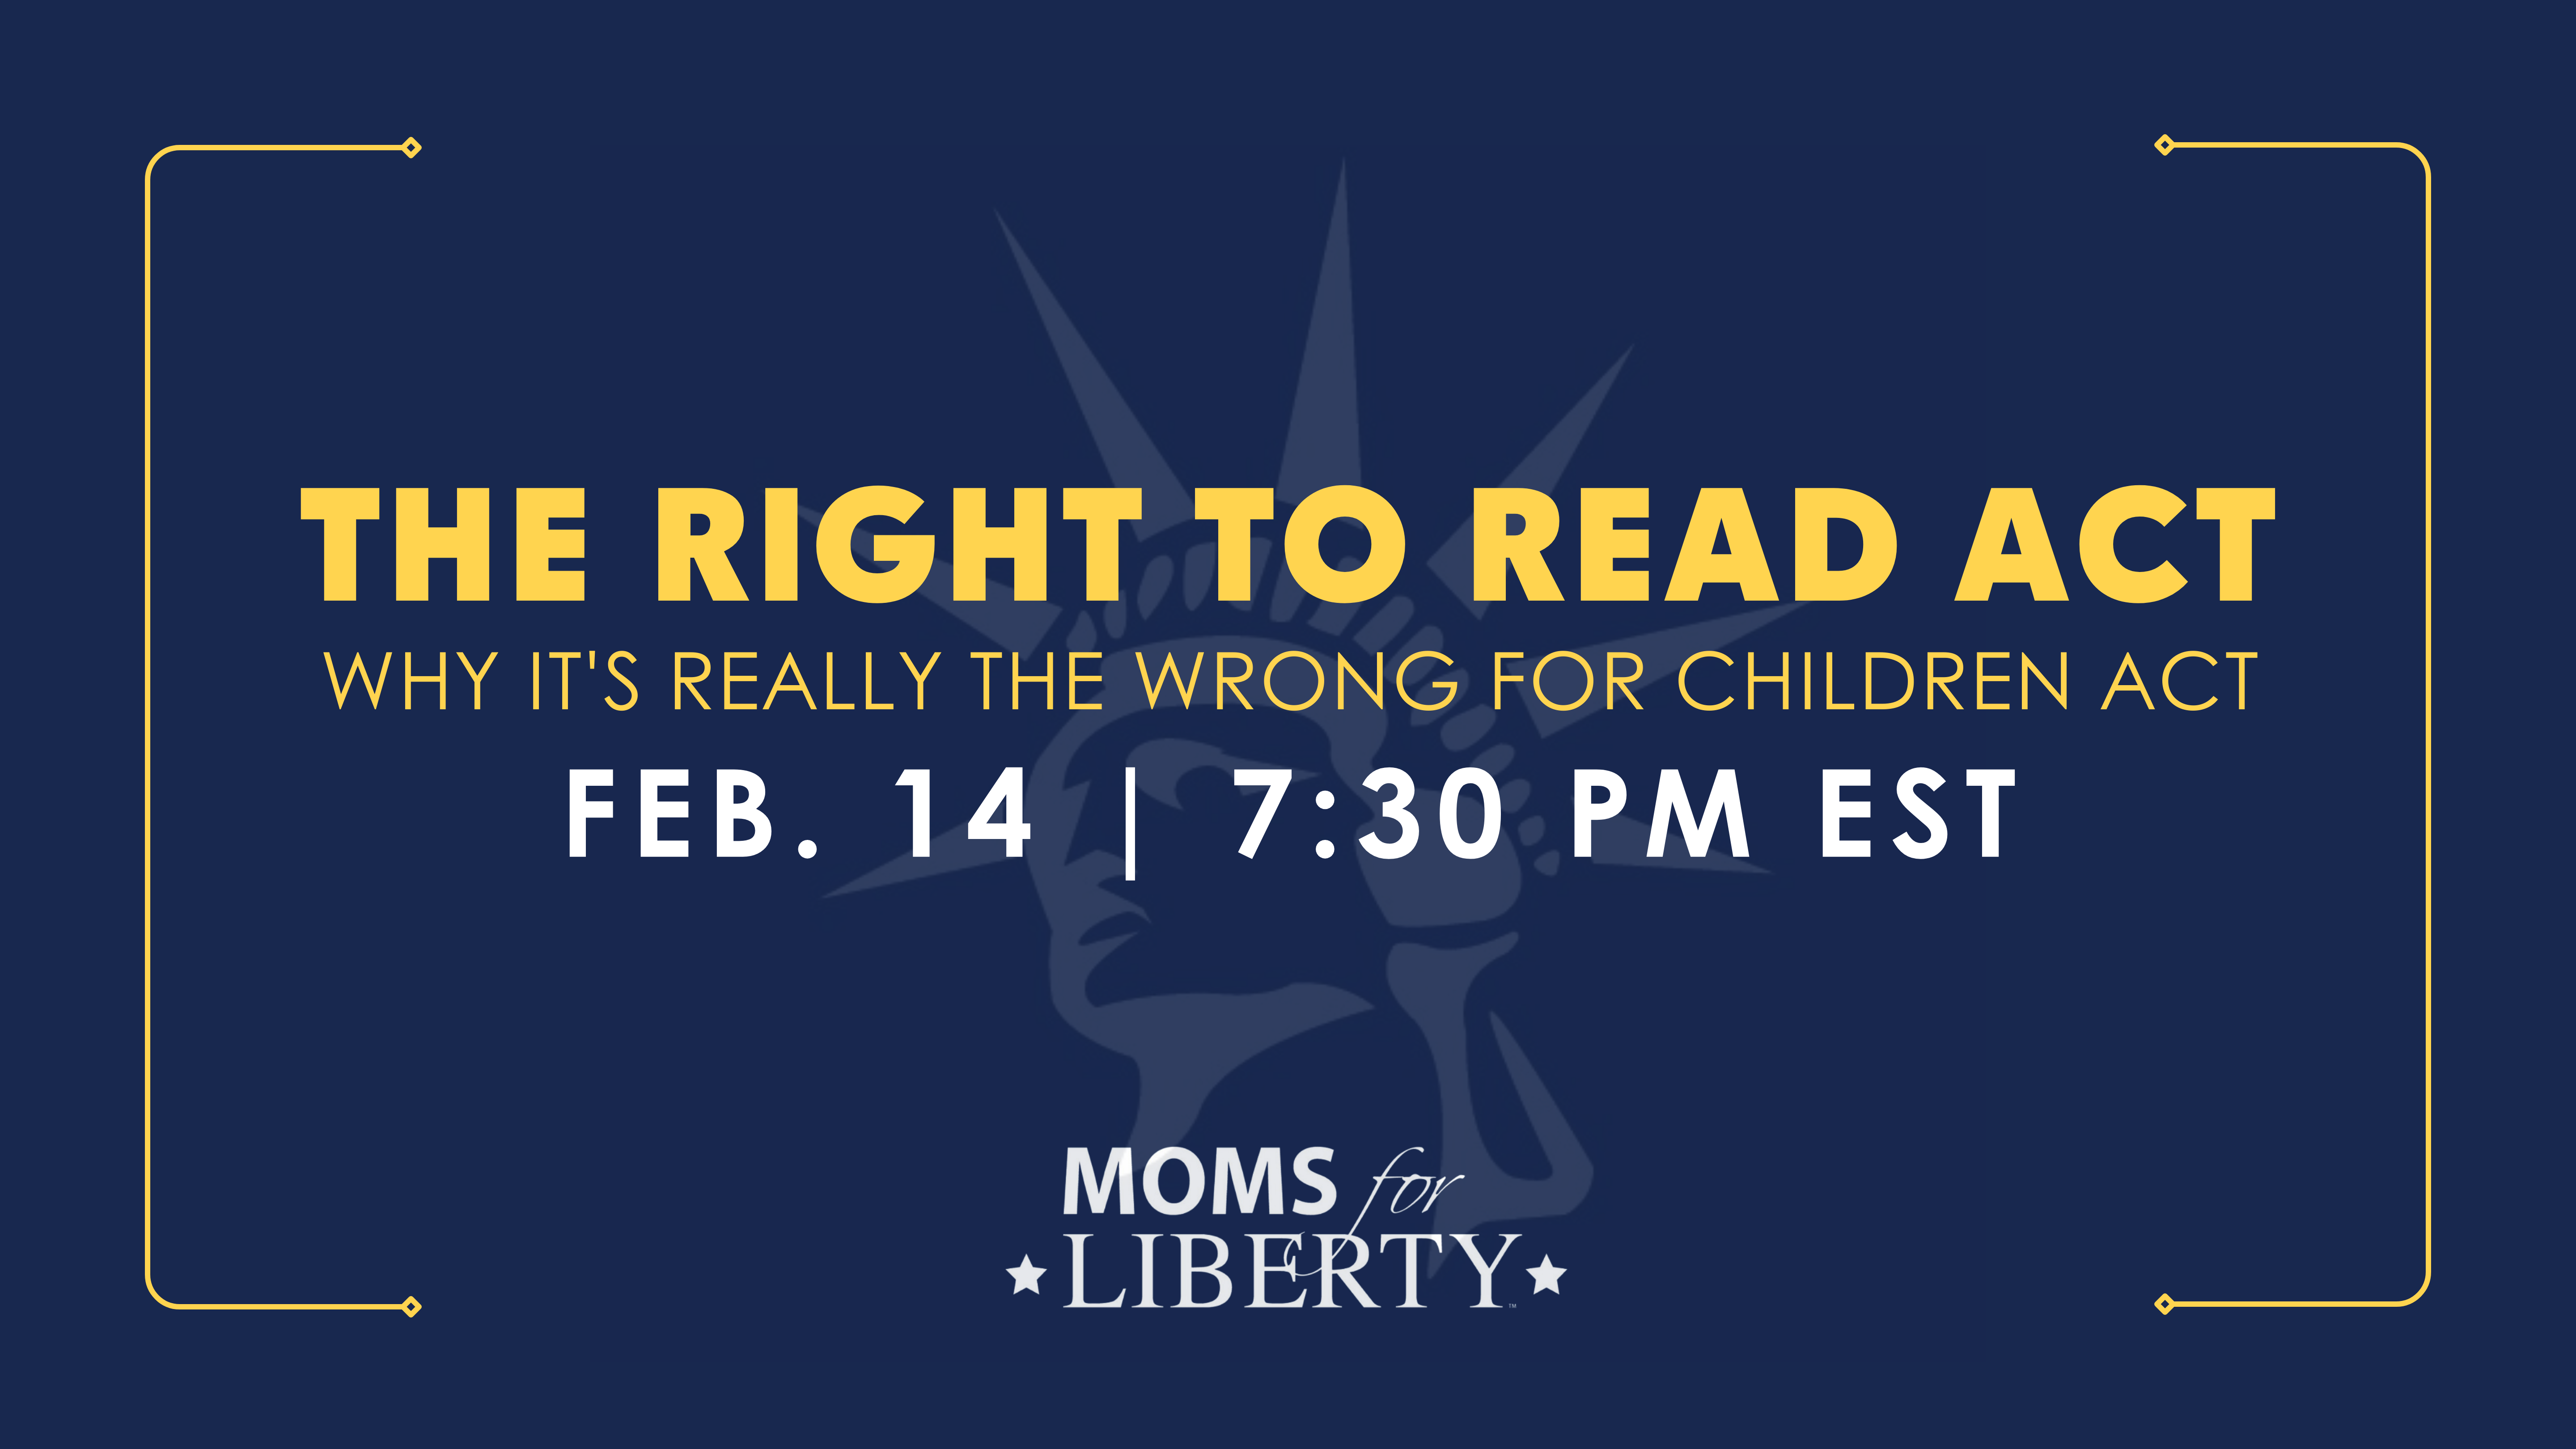 The Right to Read Act: Why It's Really The Wrong for Children Act